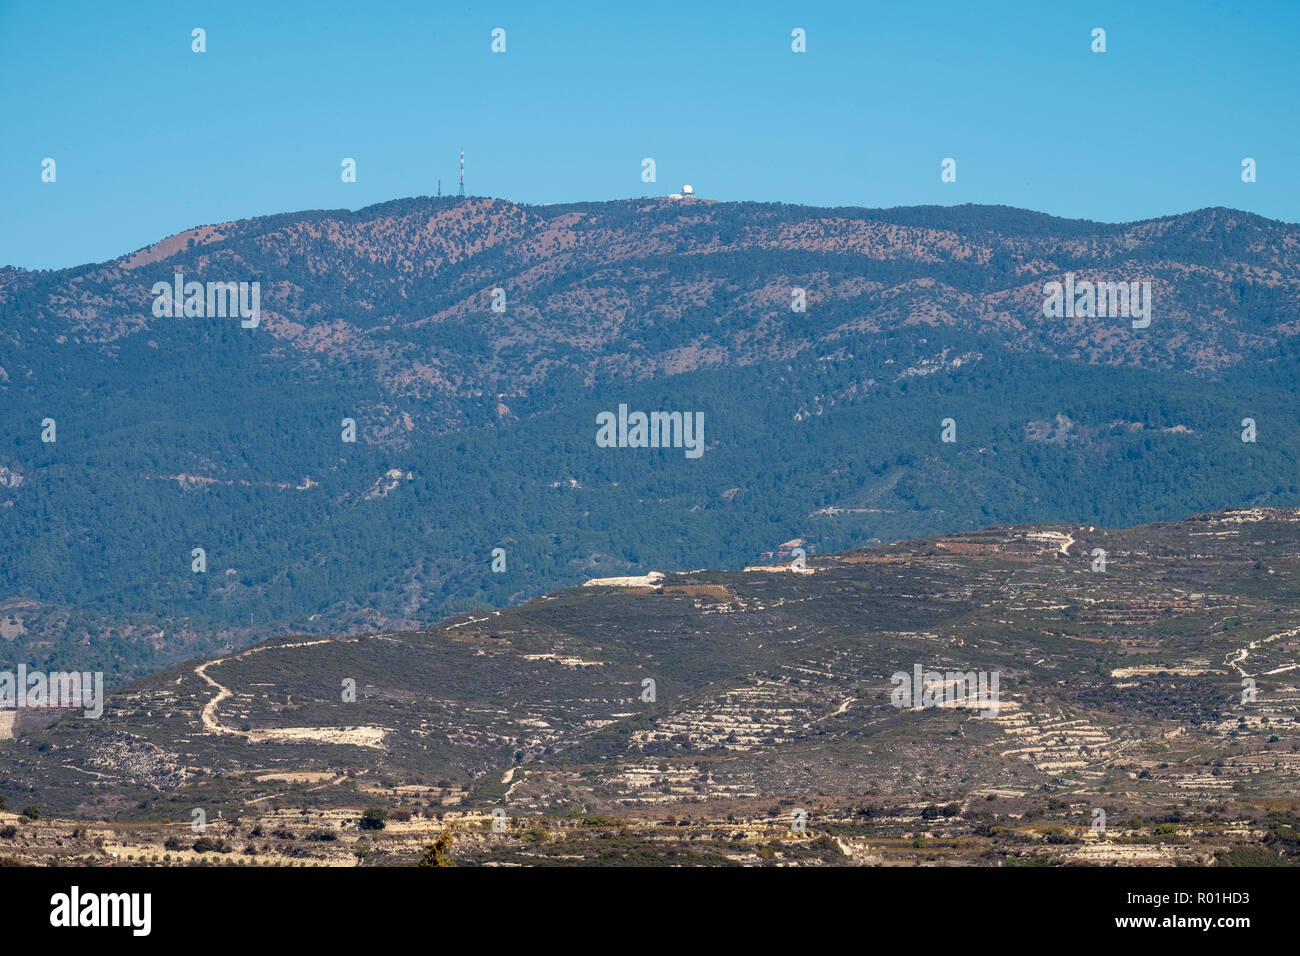 View of the Mount Olympus also know as Choinistra, the highest point in the Troodos mountain range, Cyprus. Stock Photo